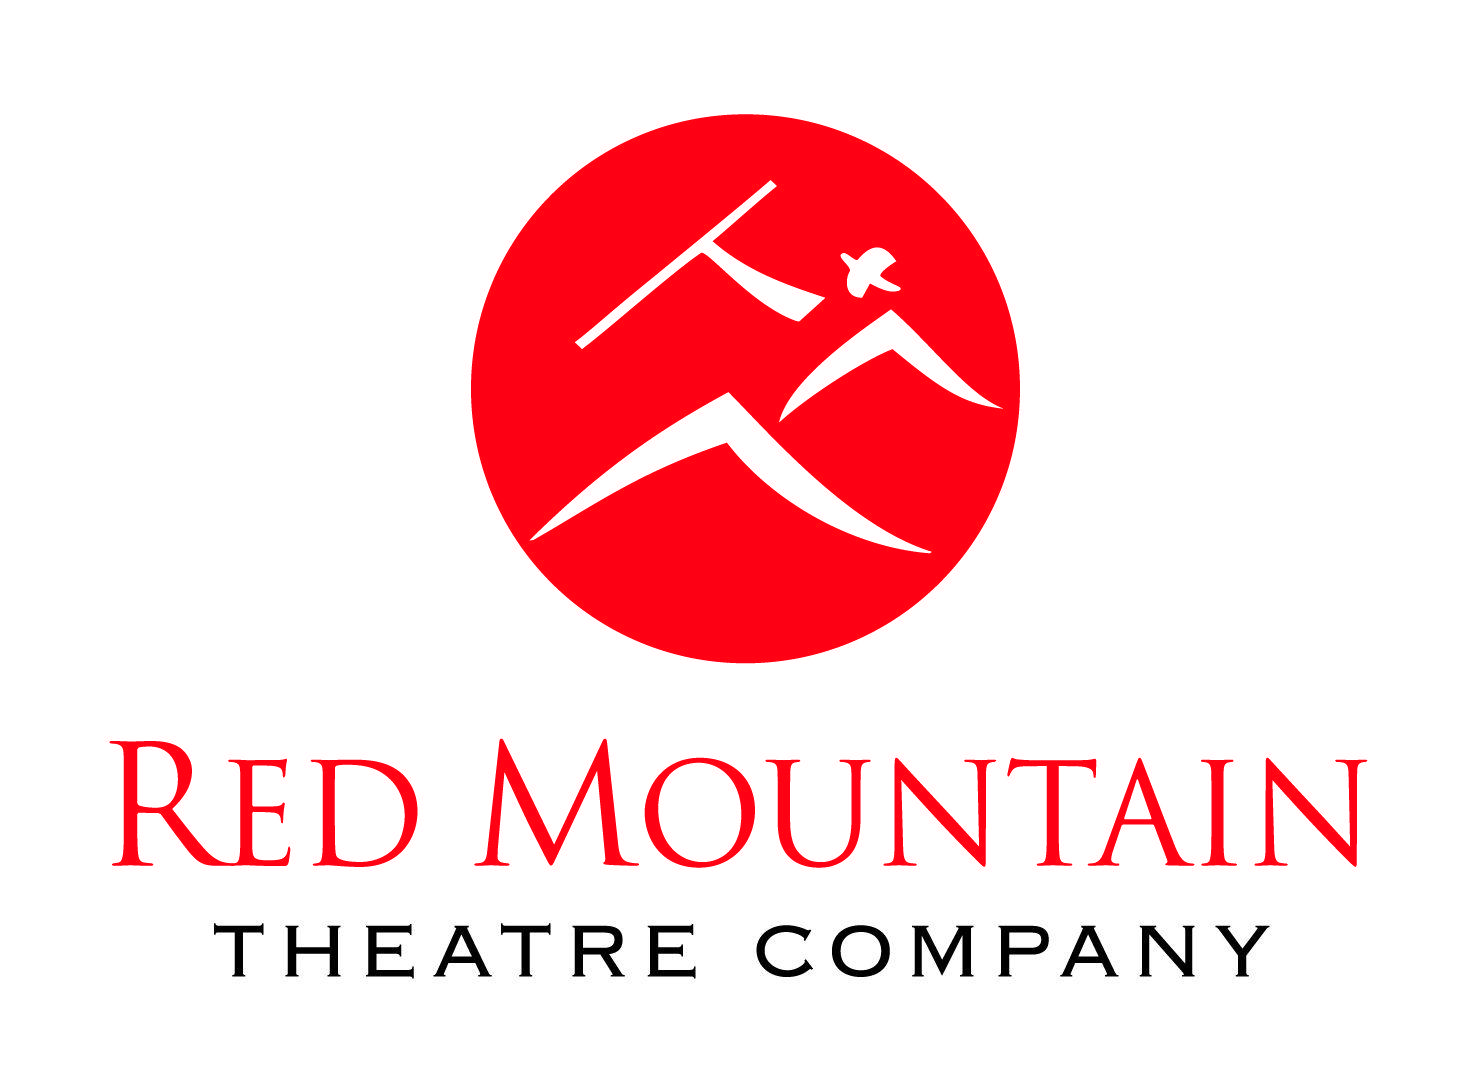 Red Mountain in Circle Logo - Red Mountain Theatre Company | Birmingham365.org